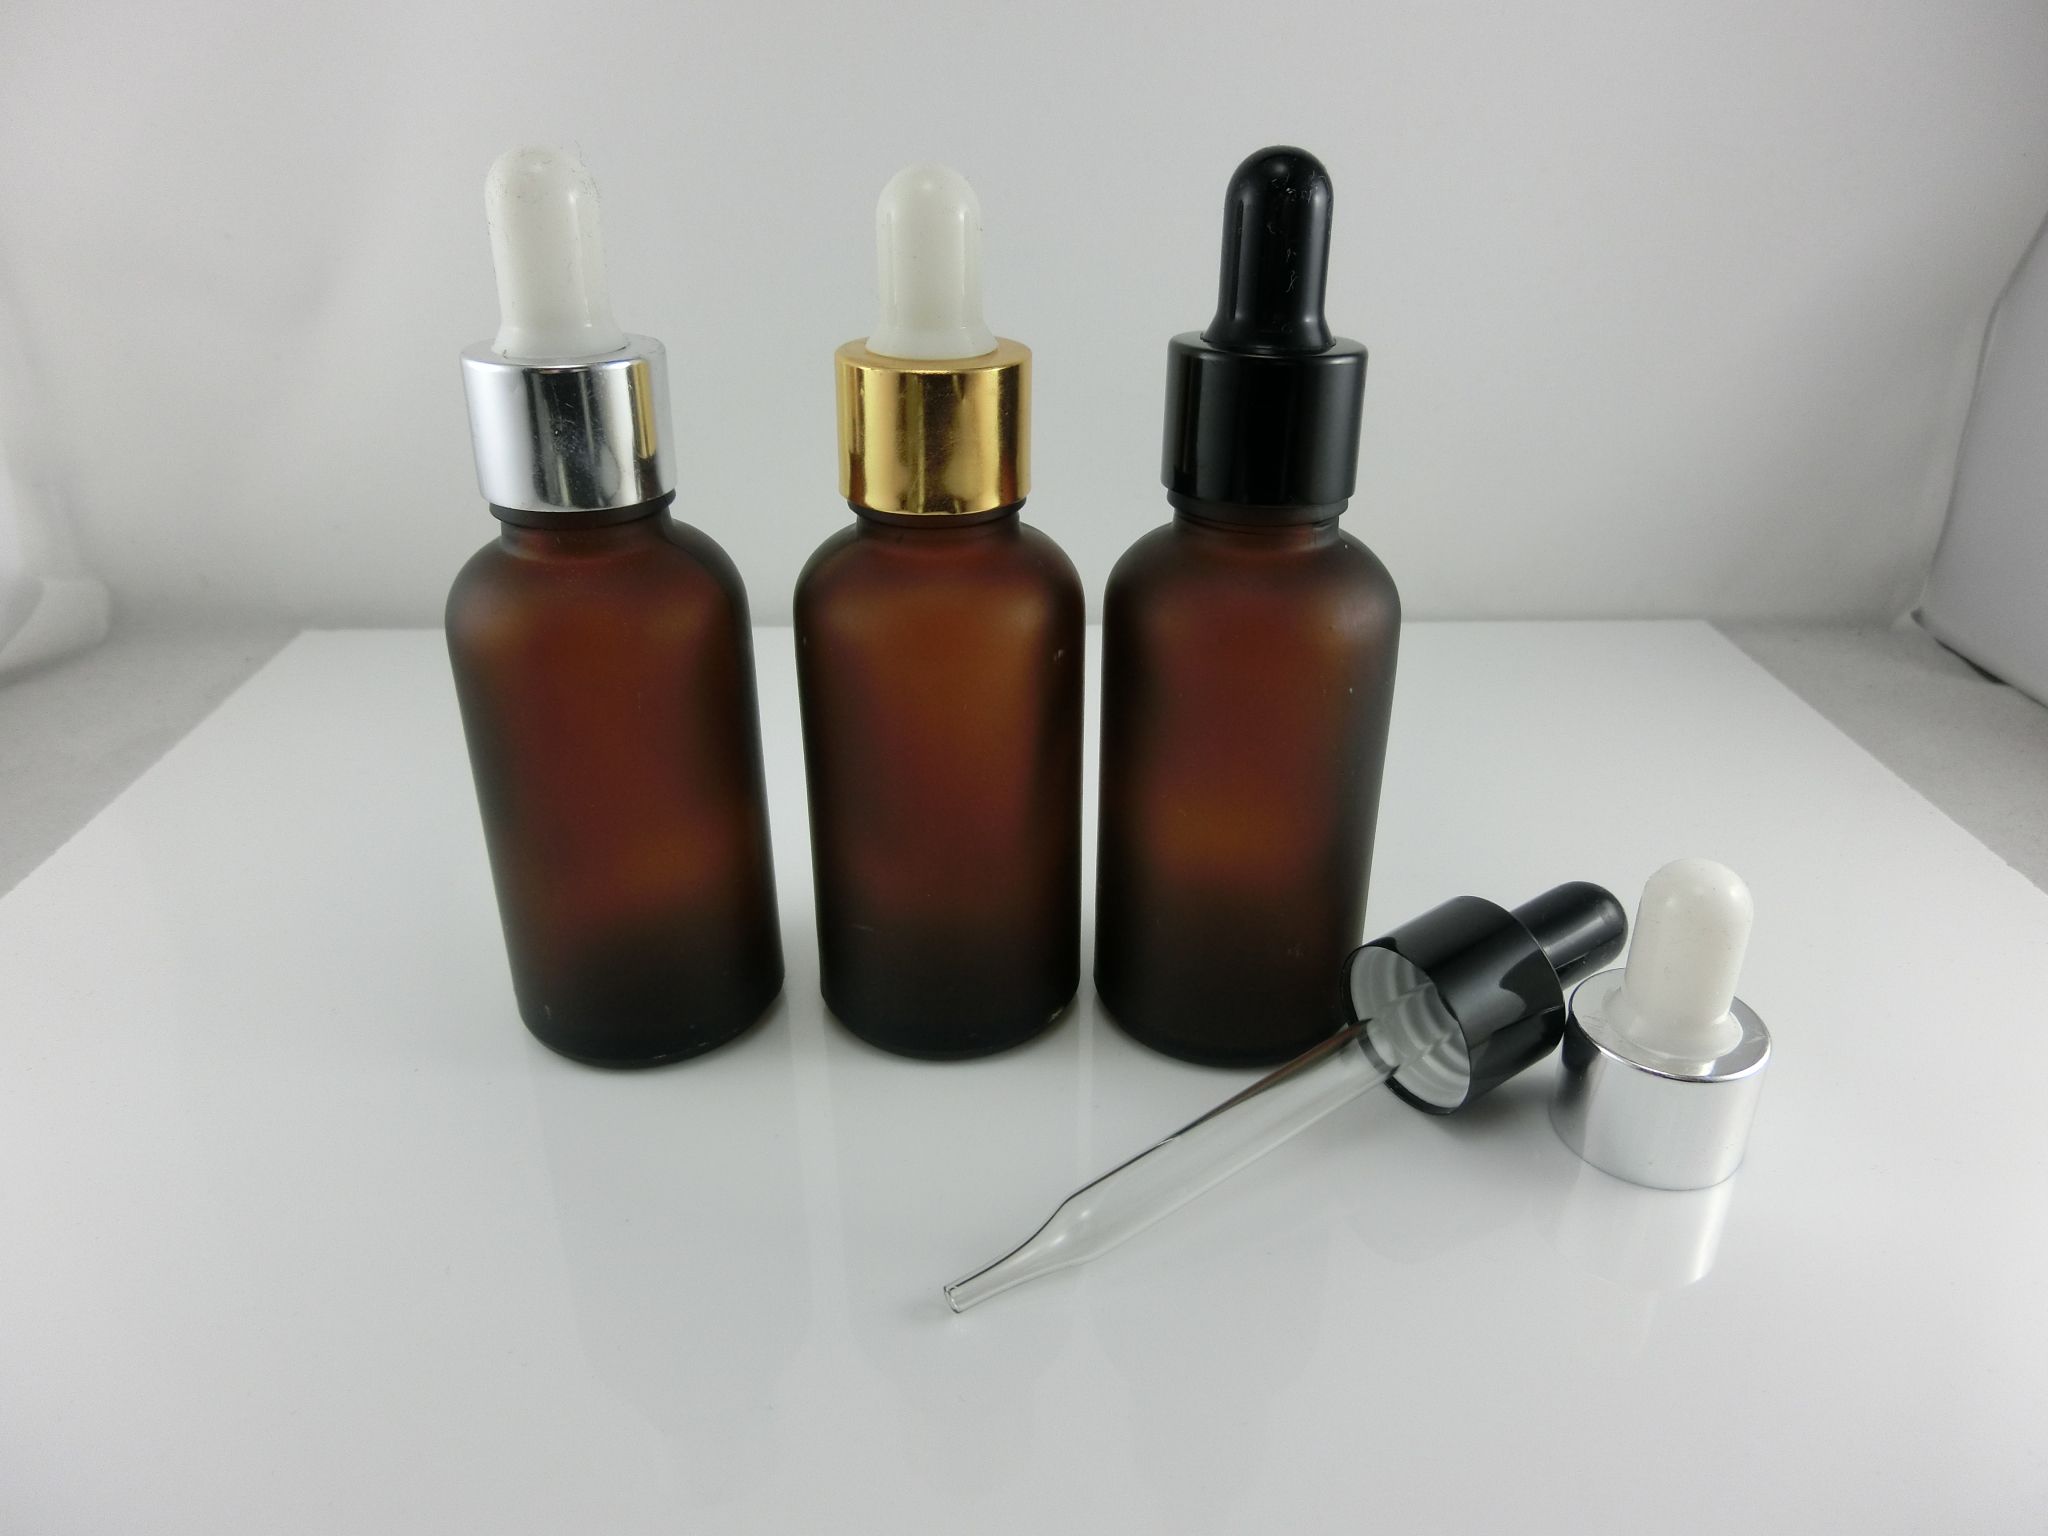 Download 2019 Wholesale 30ml 1 Oz Amber Frosted Glass Bottles/Vails With Dropper Cap For Essential Oils ...